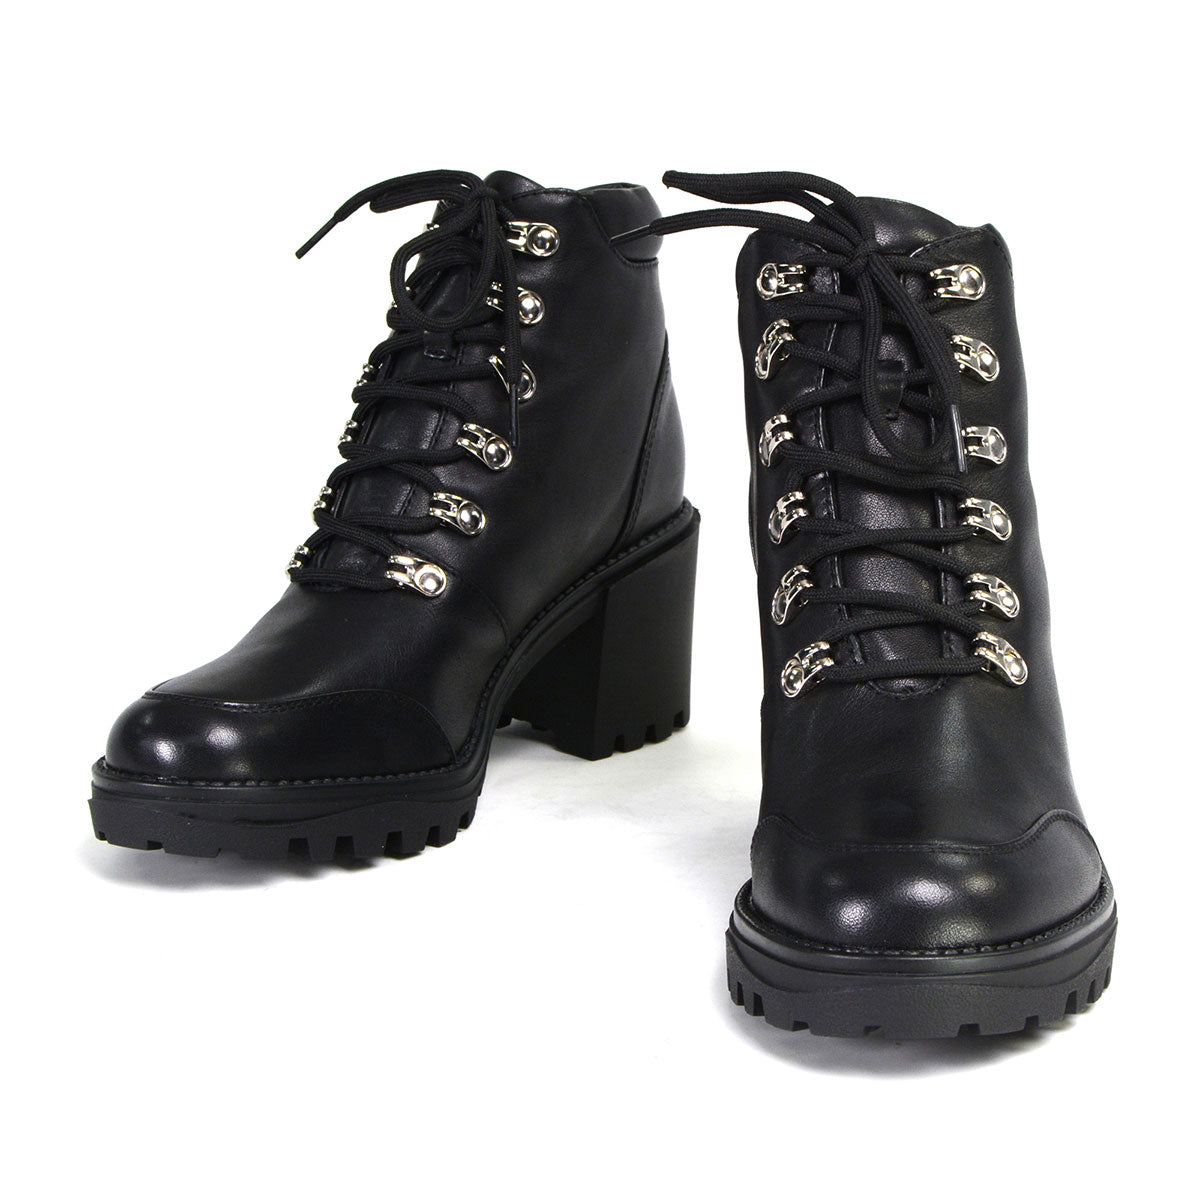 Milwaukee Leather MBL9439 Women's ‘Devine’ Black Leather Lace-Up Fashion Boots with Platform Heel